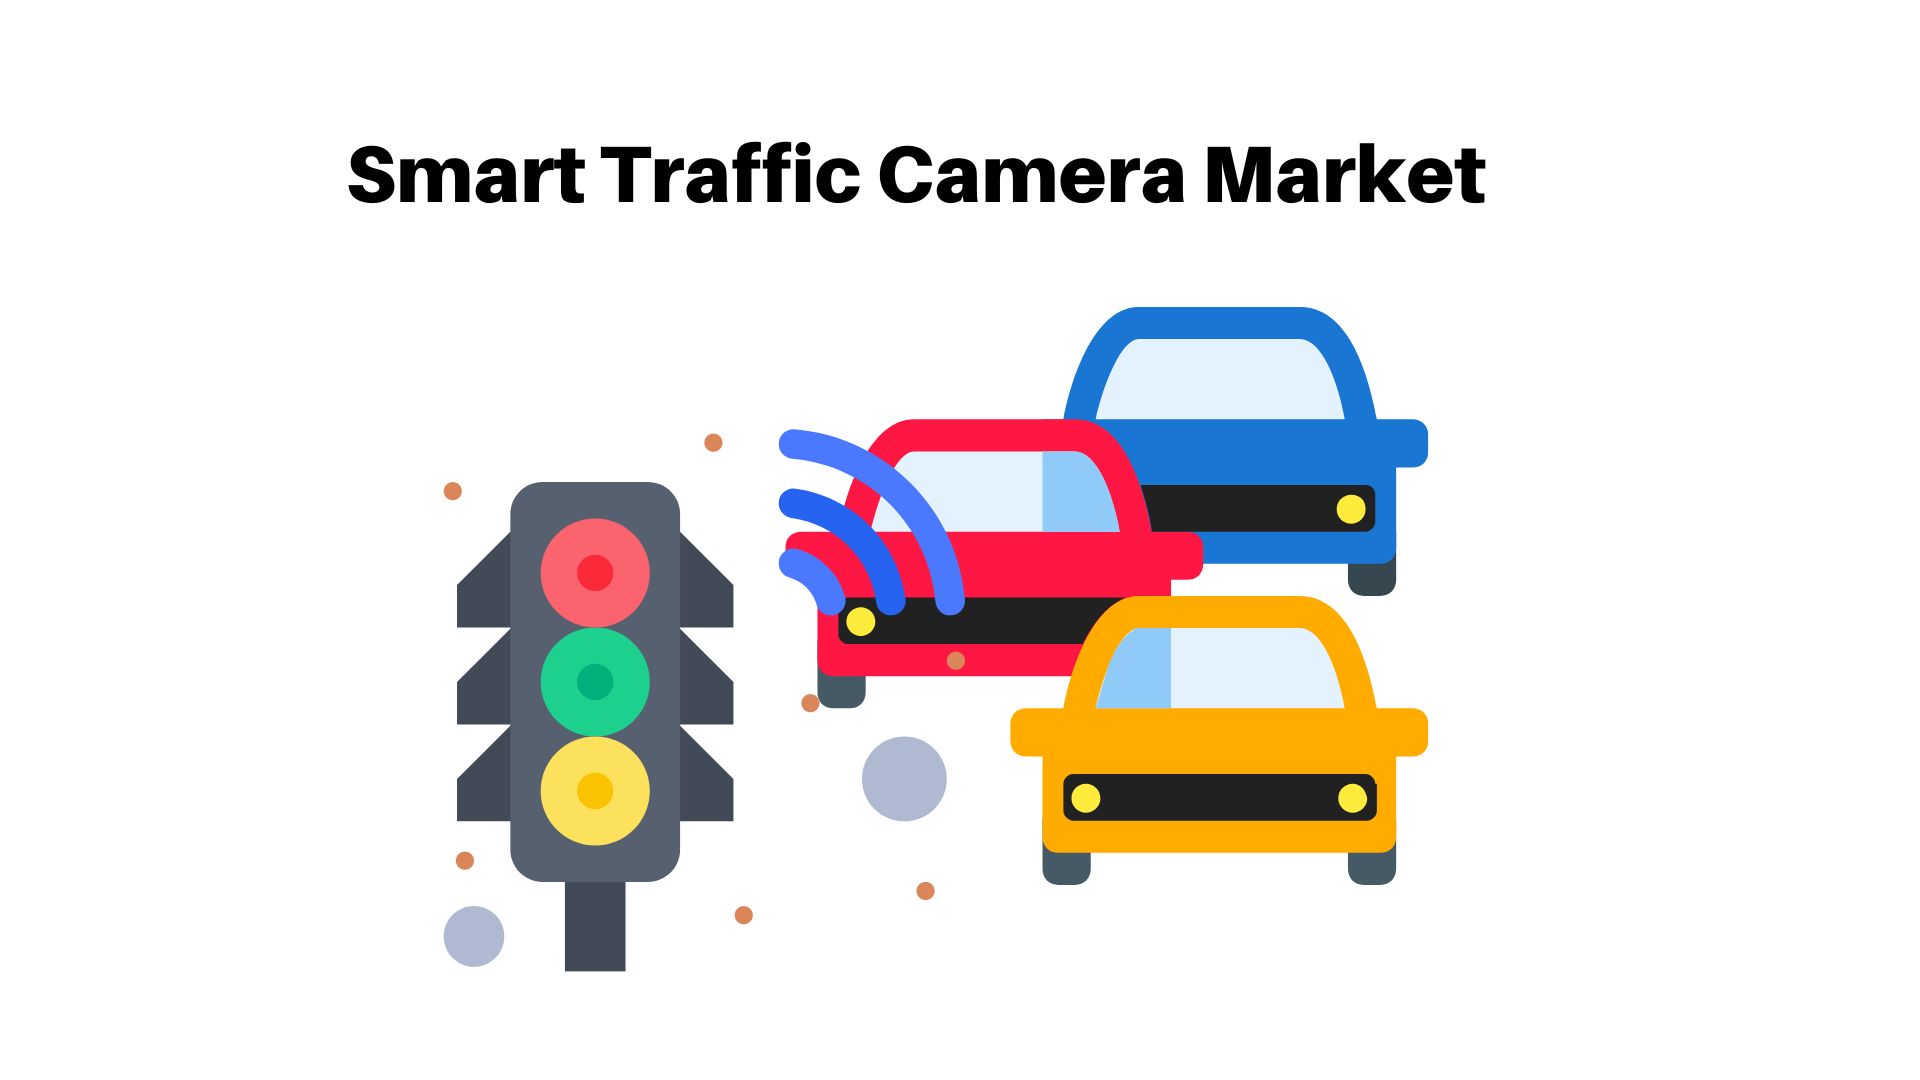 Smart Traffic Camera Market is expected to reach USD 47.16 Bn by 2033 | CAGR of 14.3%